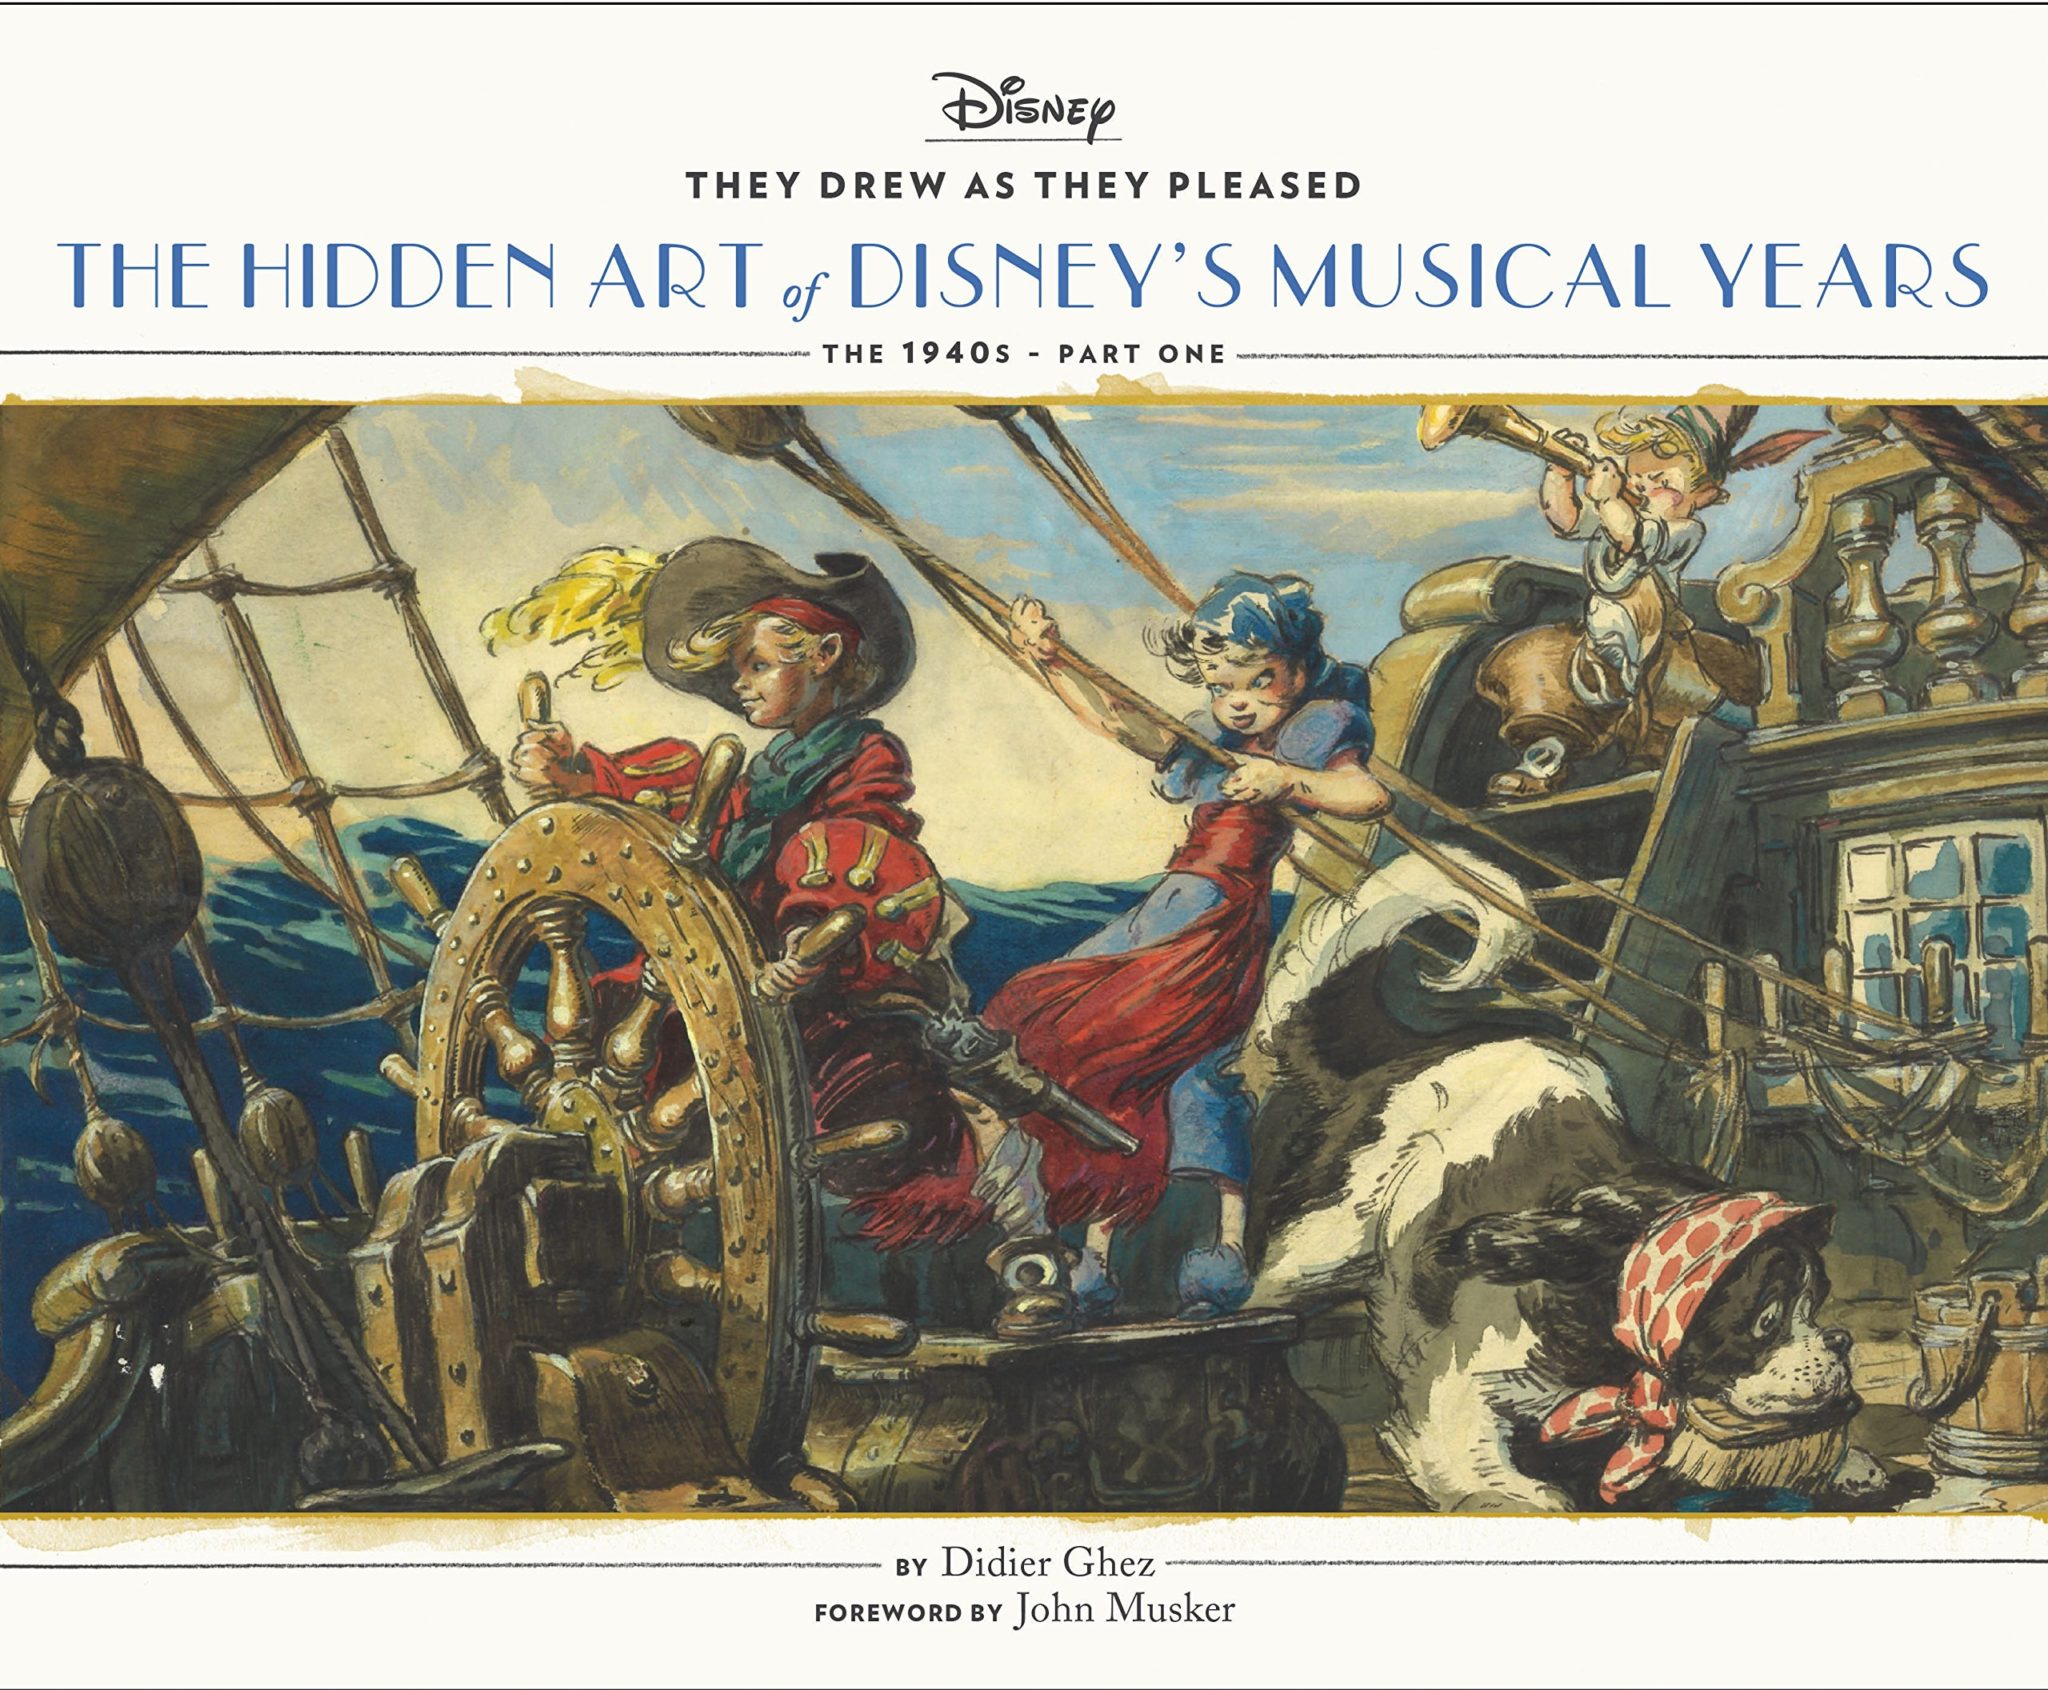 They Drew as They Pleased: The Hidden Art of Disney’s Musical Years